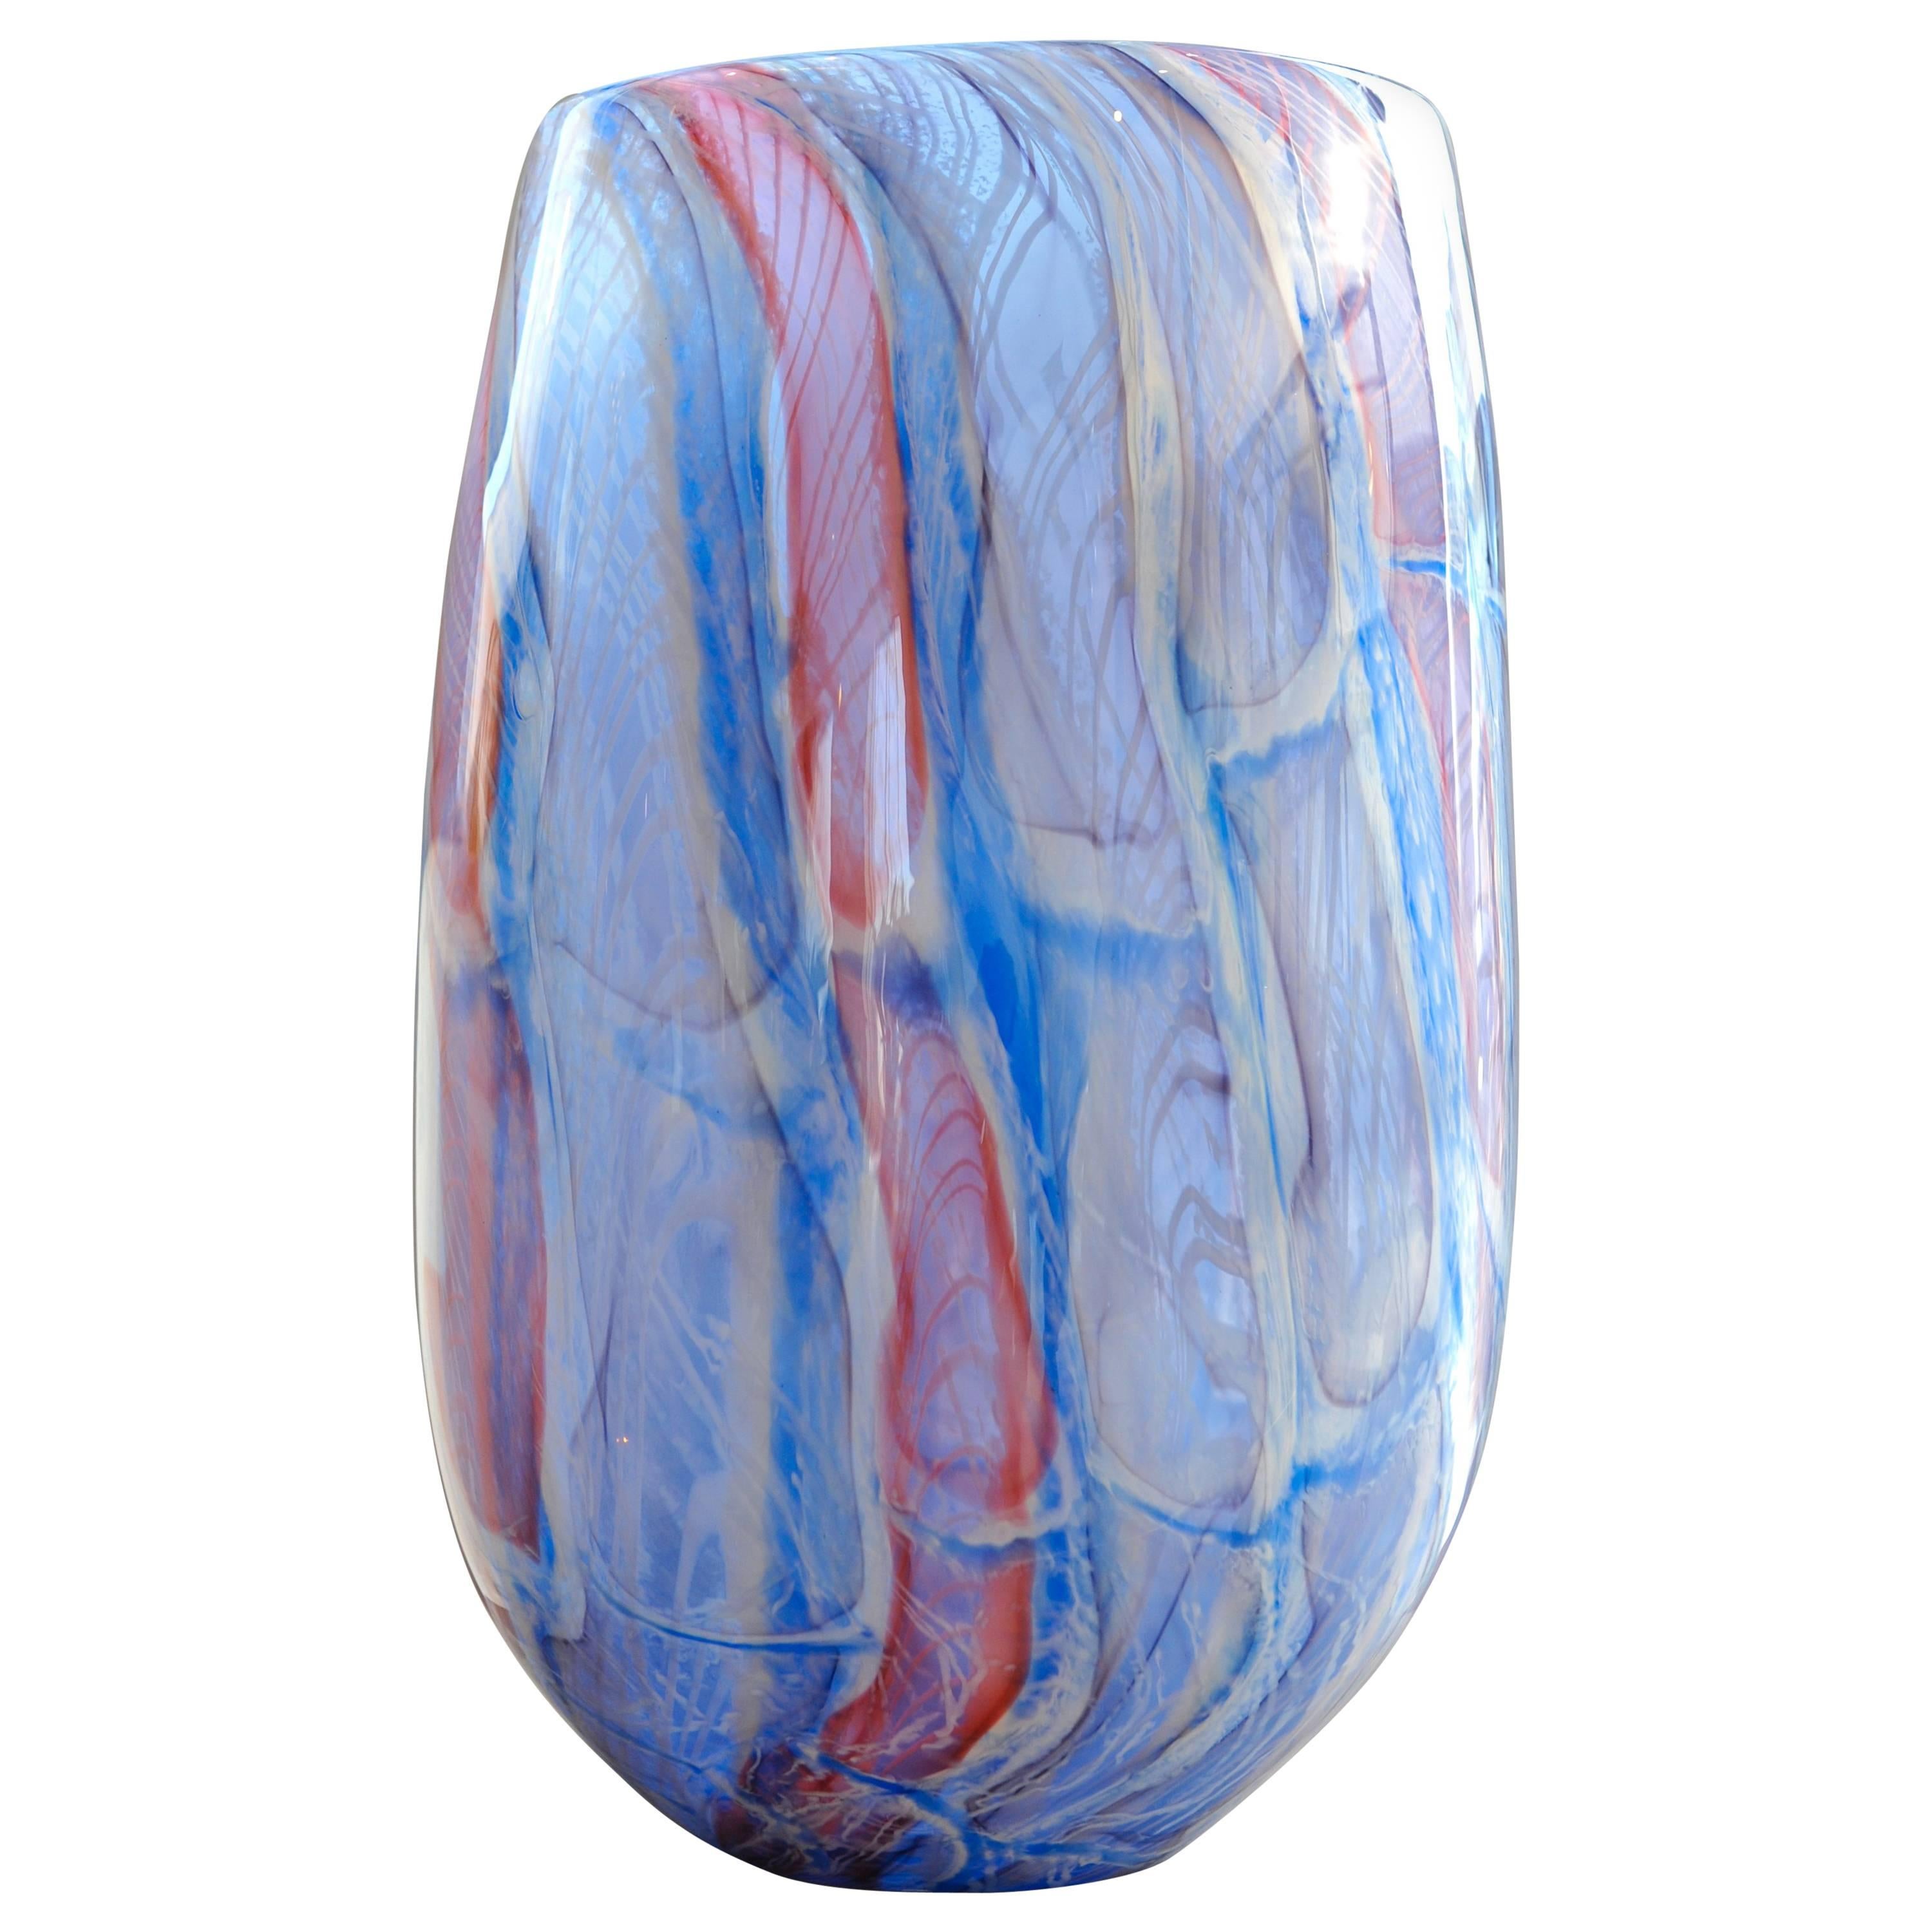 Large Blown Glass Design Vase in Blue and Red. Colorful Murano Style Glass For Sale